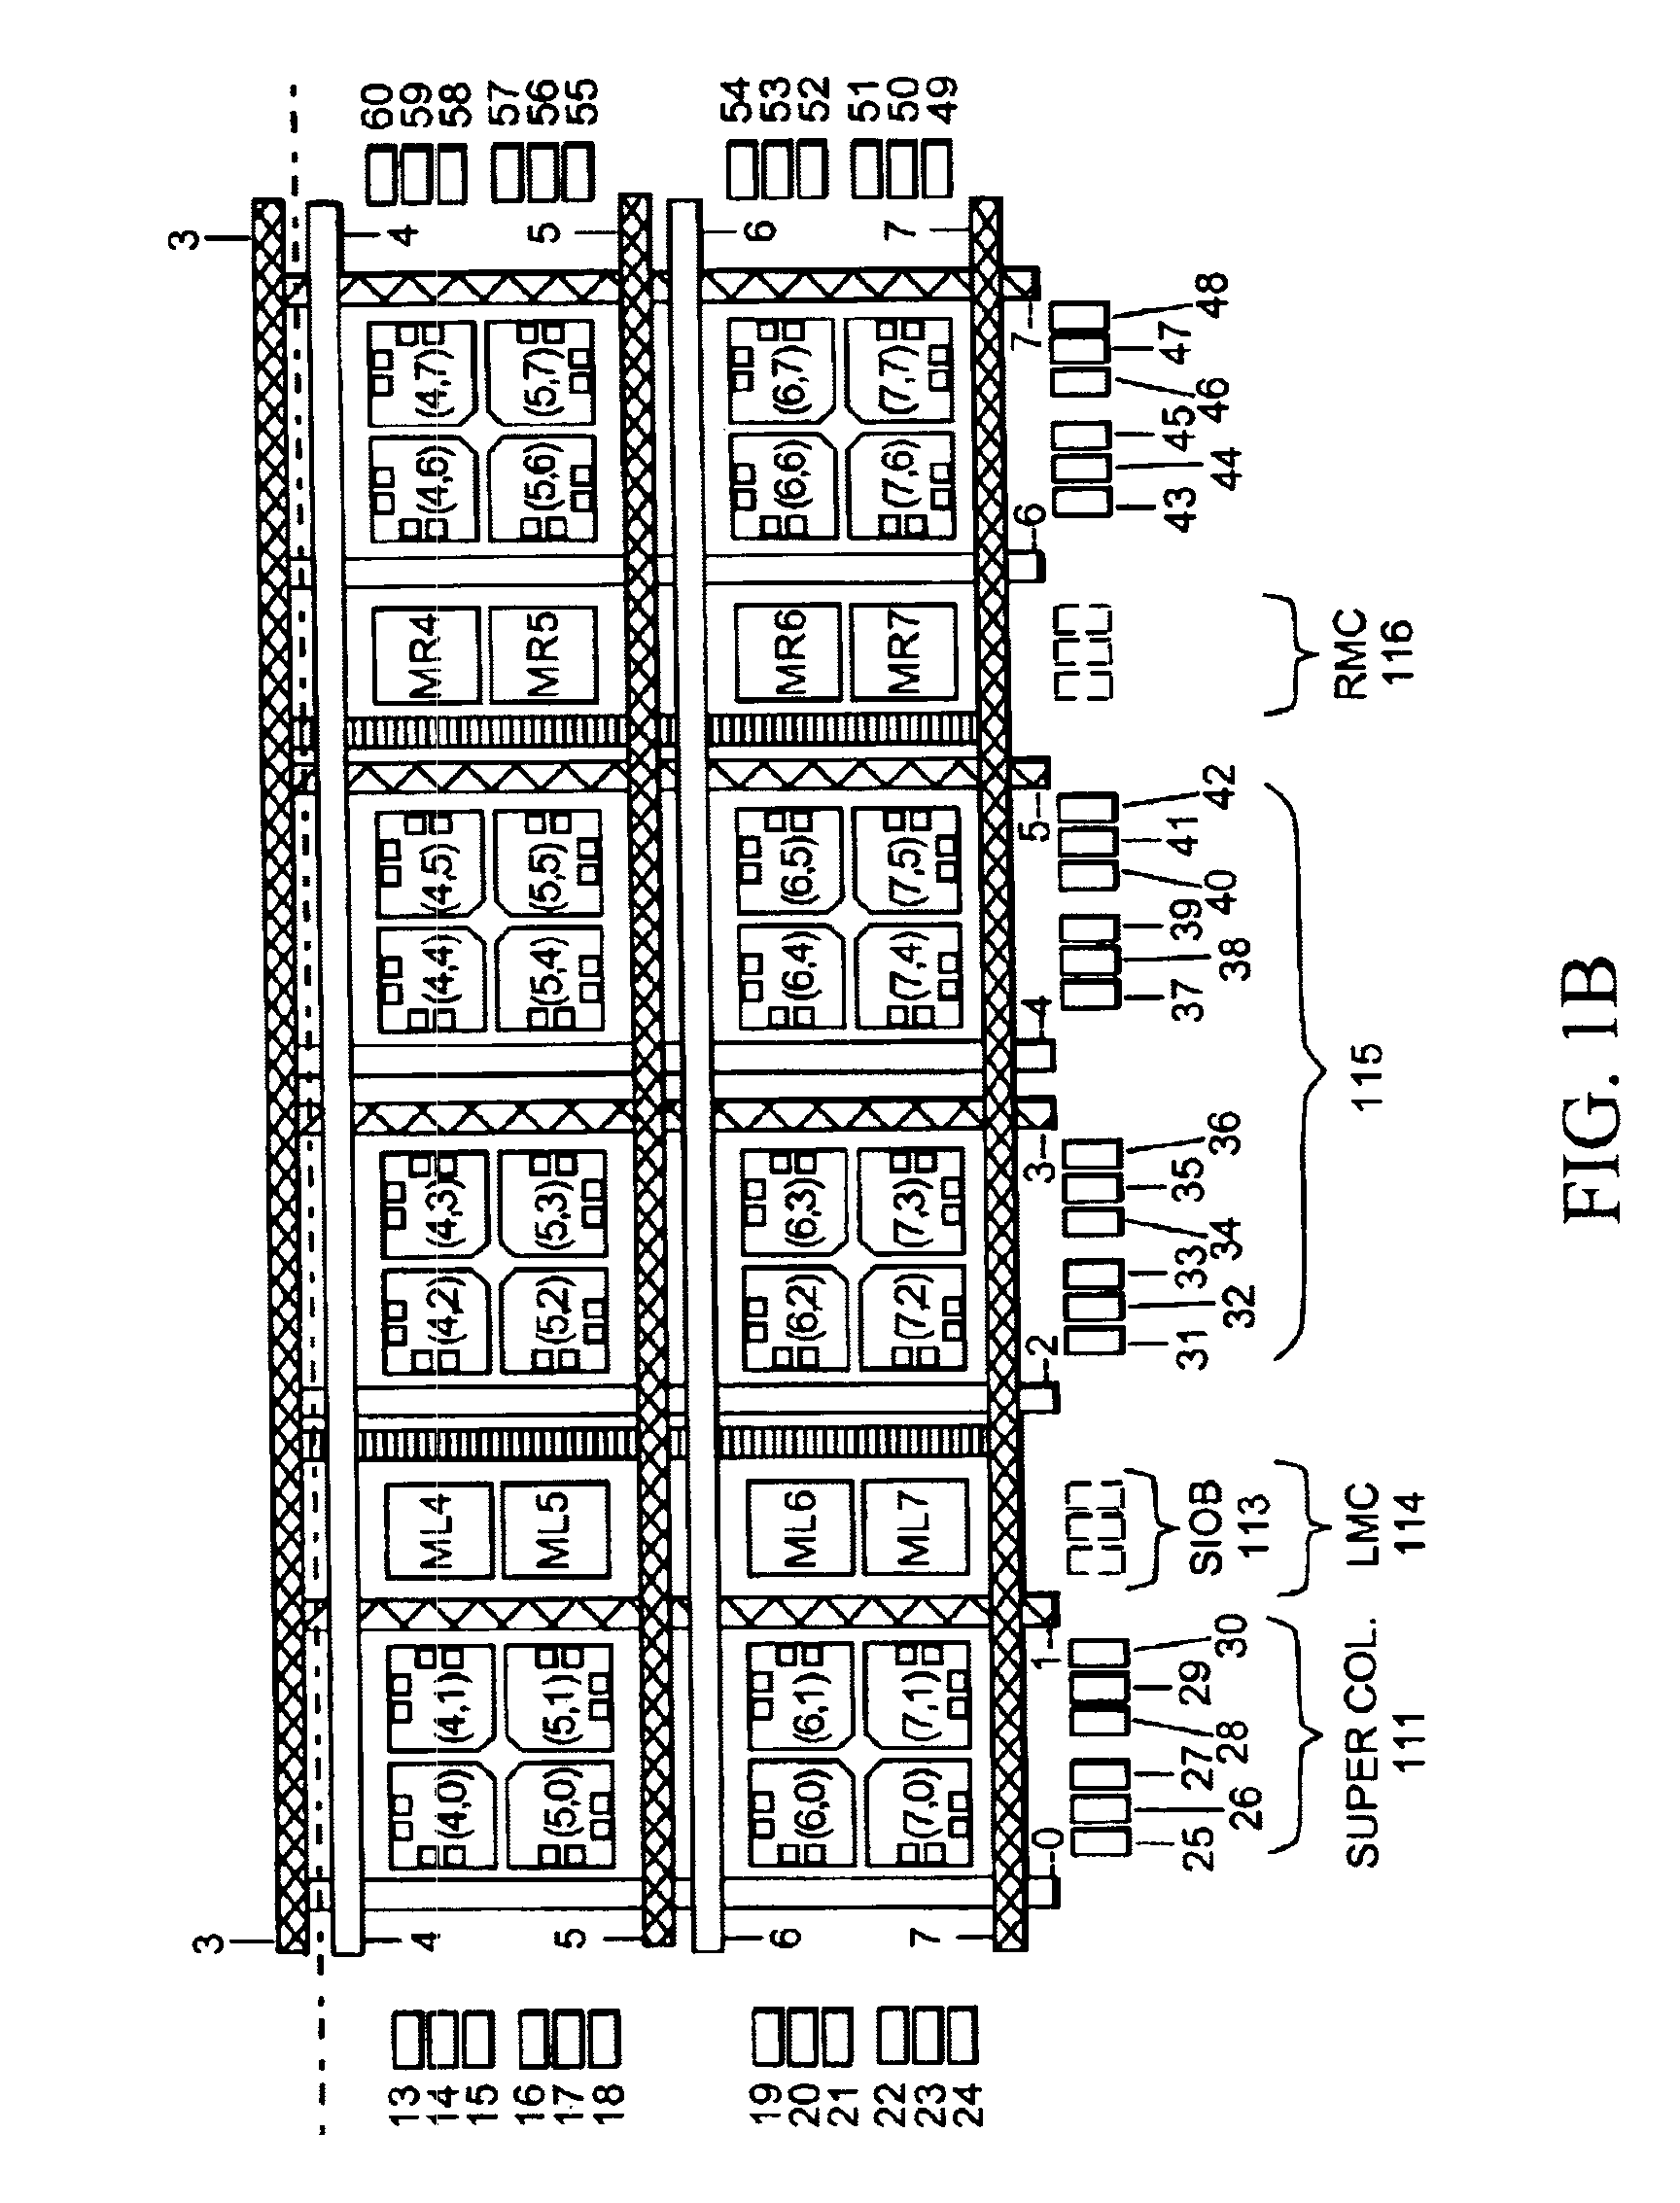 FPGA integrated circuit having embedded sram memory blocks with registered address and data input sections